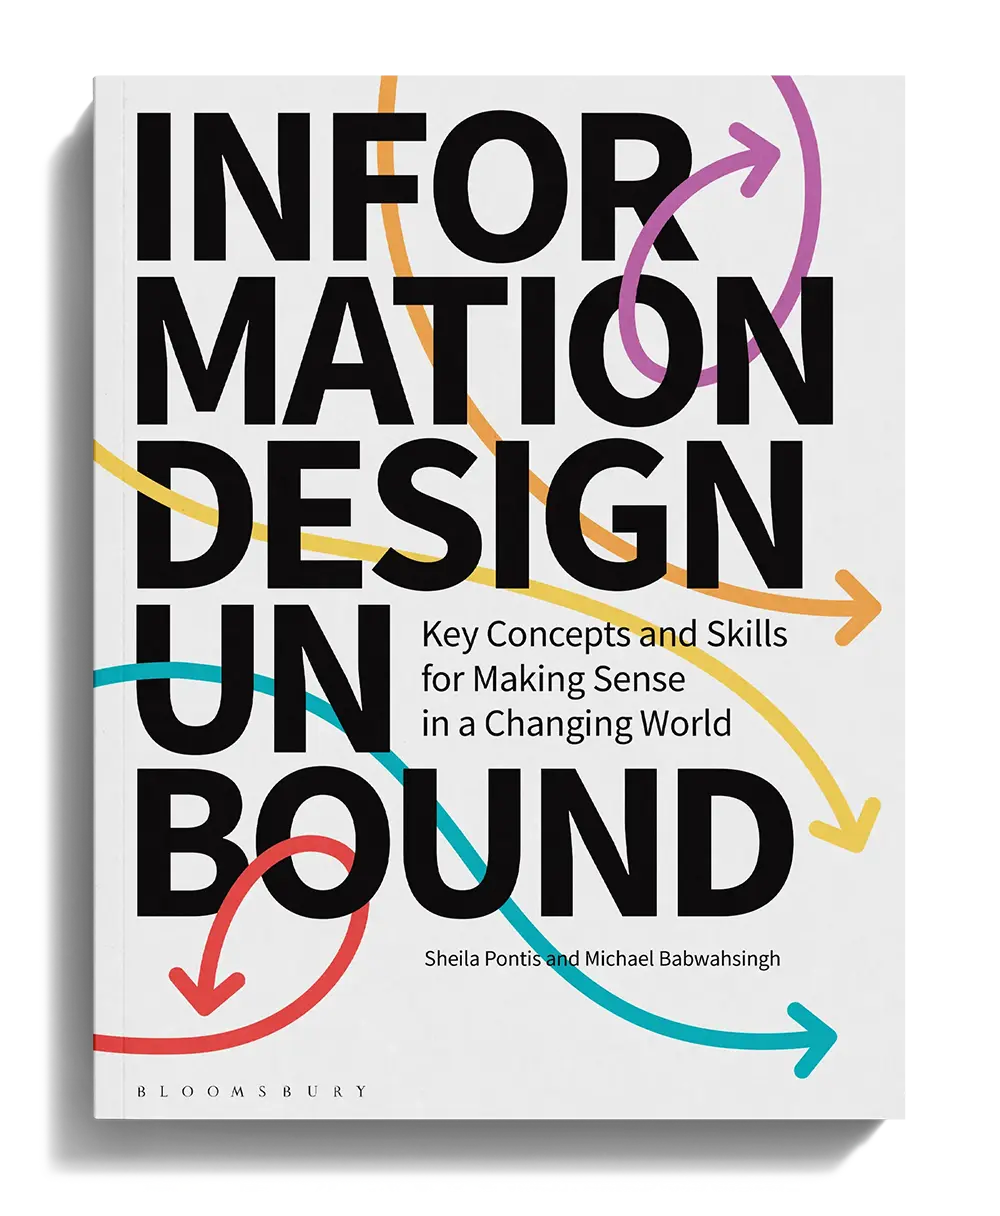 Cover of Information Design Unbound with colorful arrows swirling around text